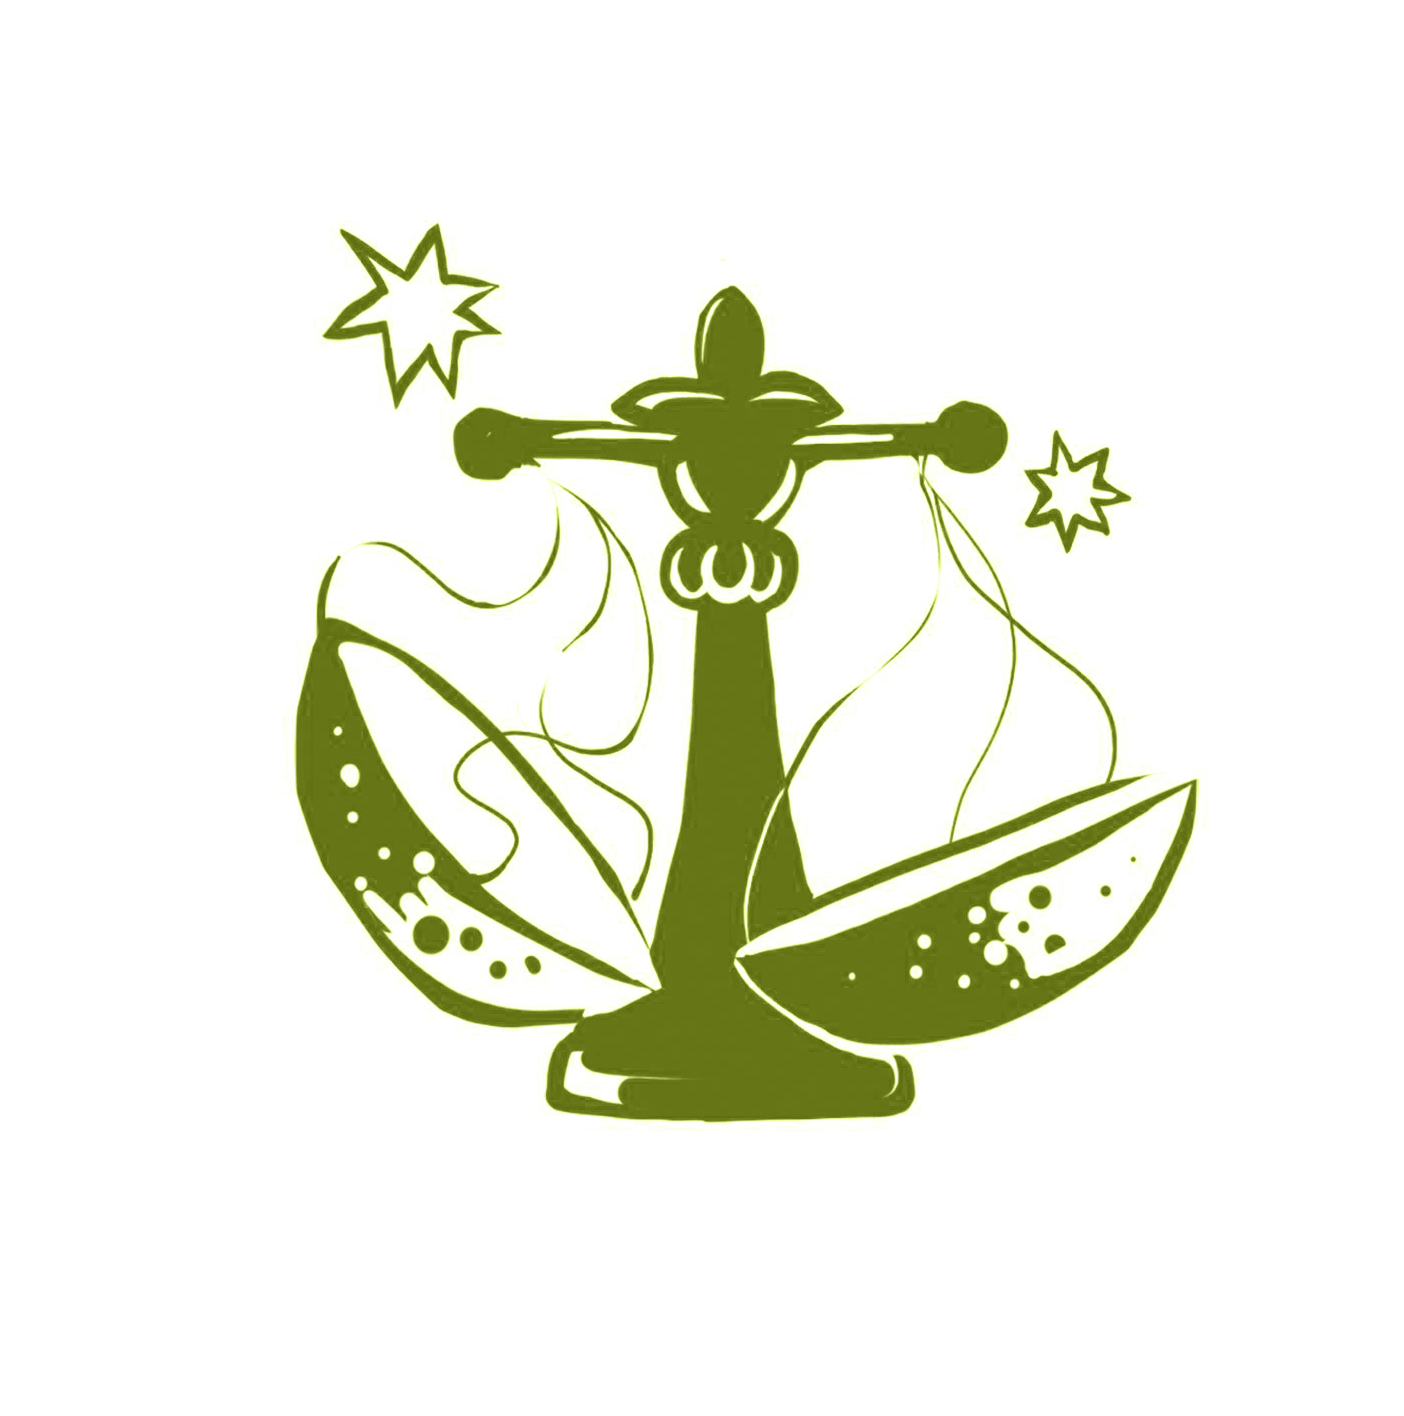 Illustration of scales that look balanced, decorated with stars, in green, representing Libra's symbol, the scales